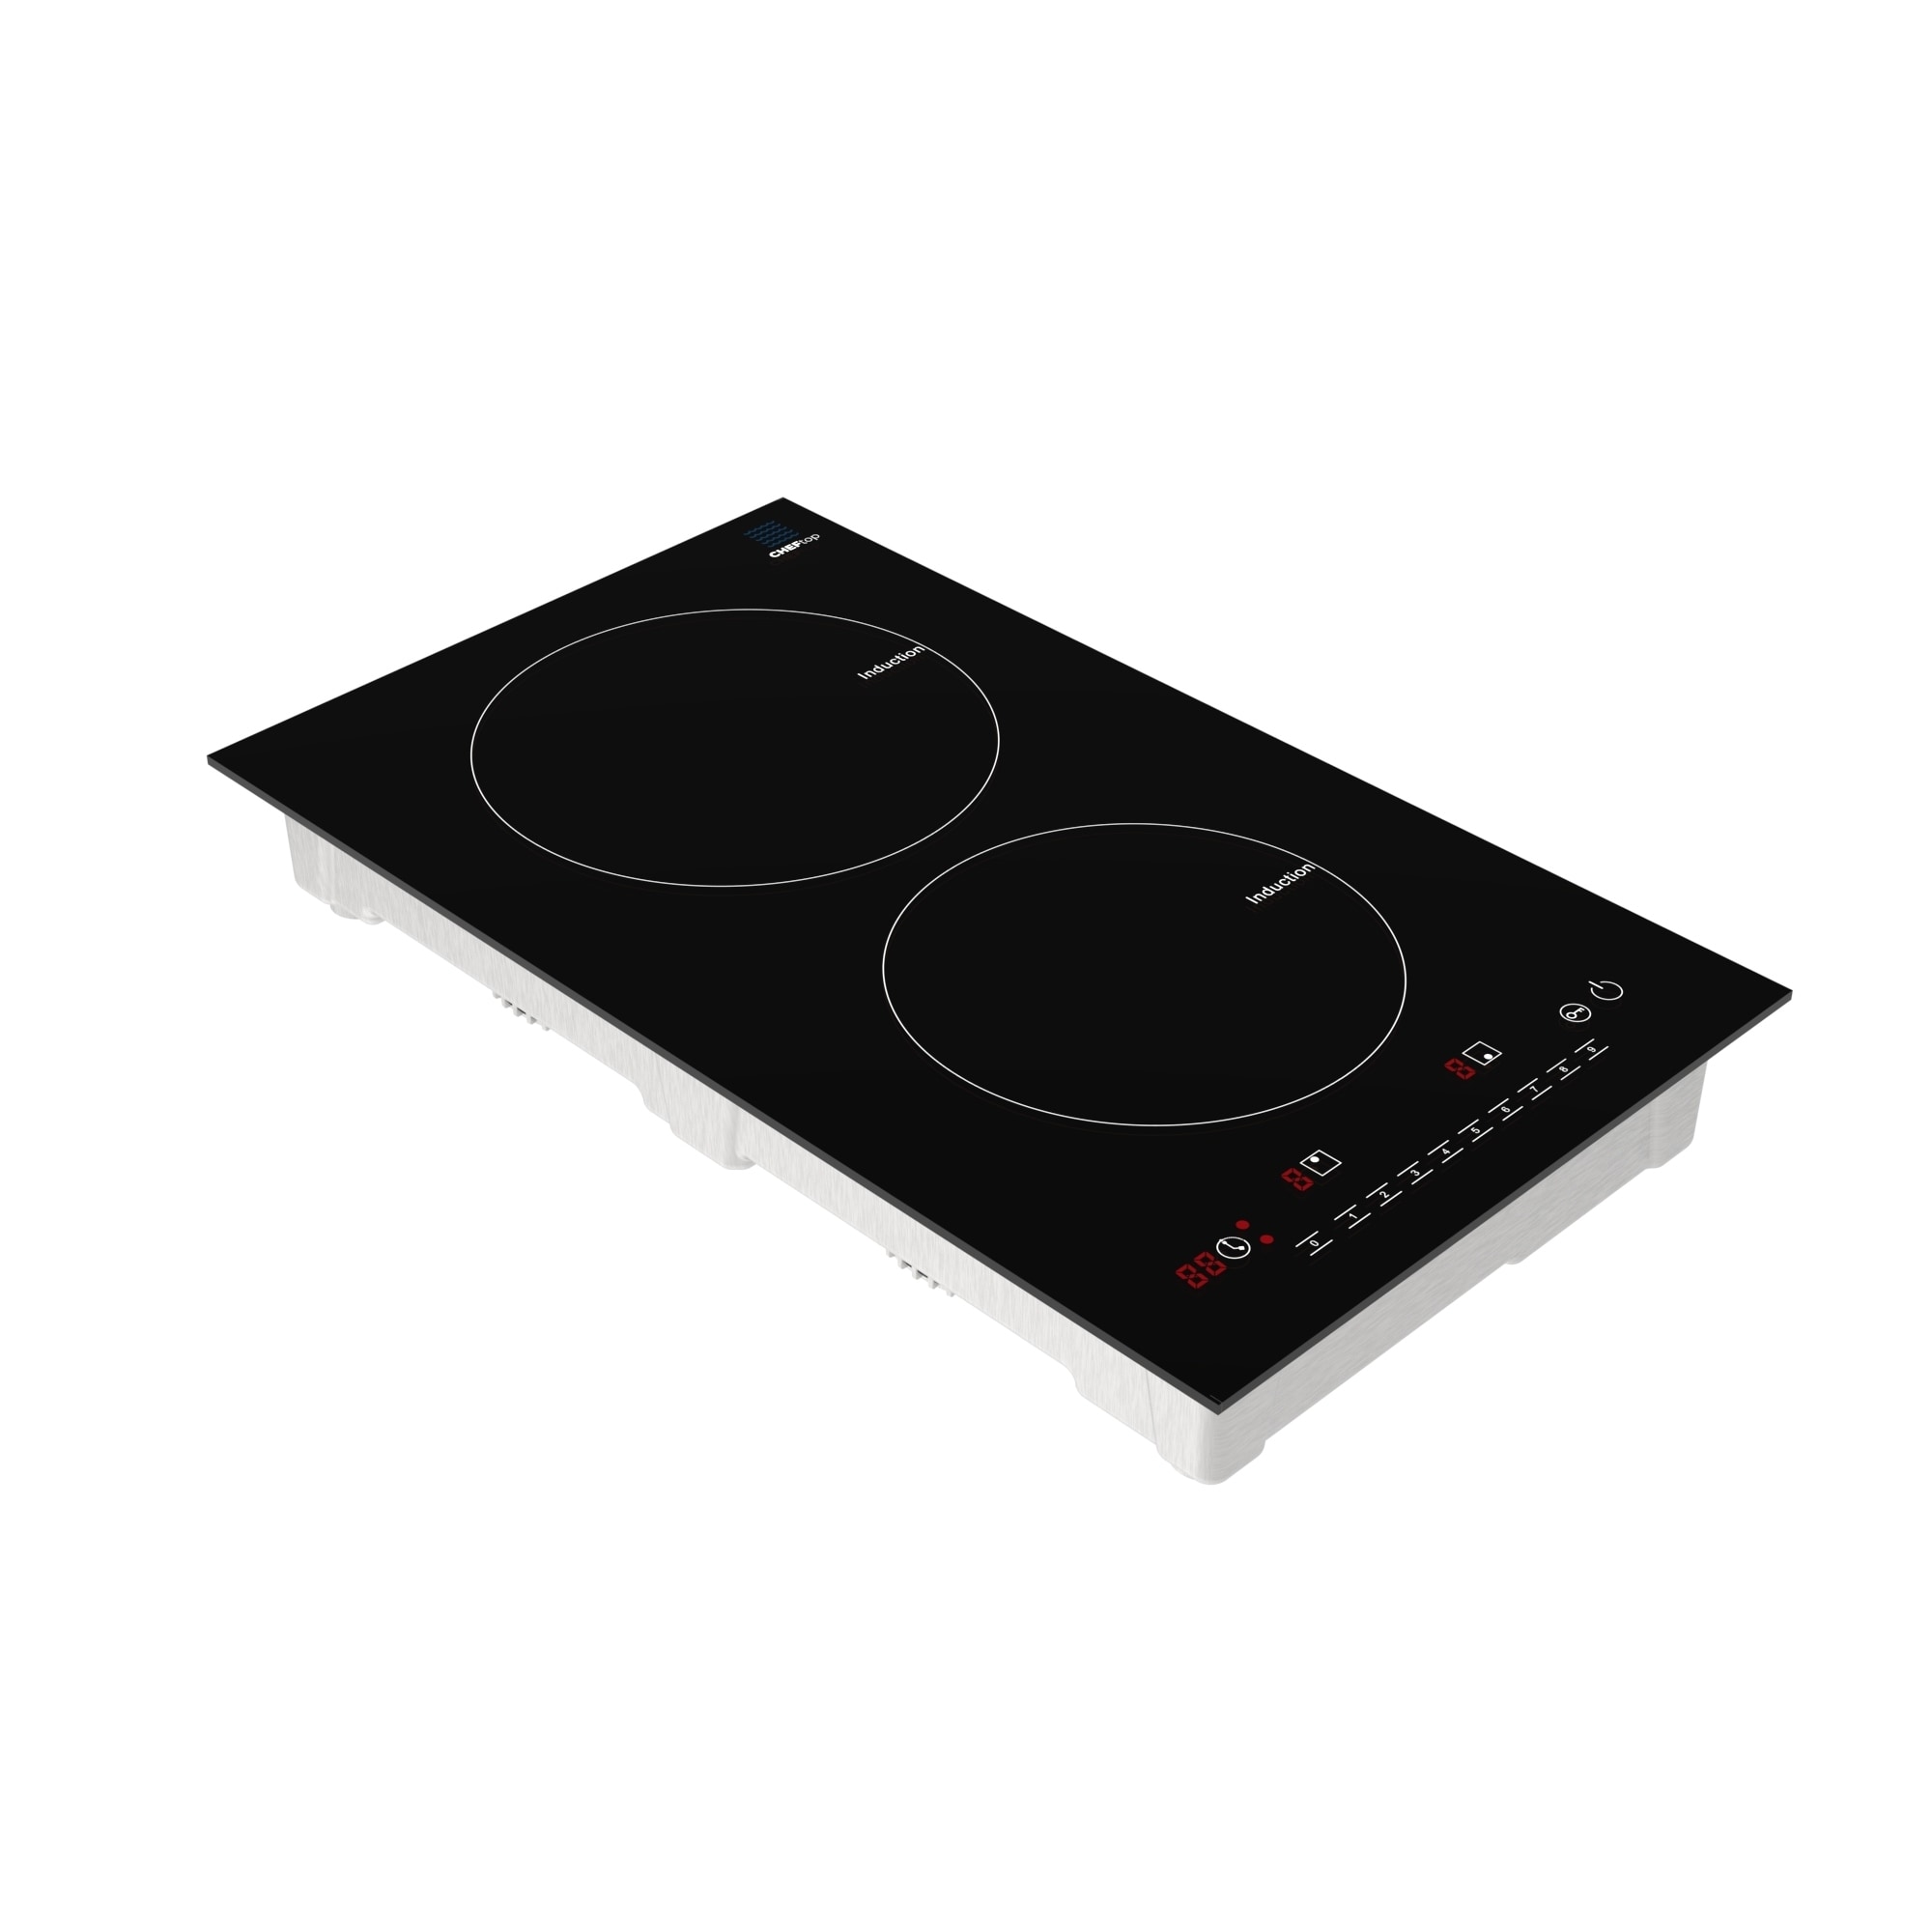 https://ak1.ostkcdn.com/images/products/is/images/direct/9397ced6ae7a8a9ed2b588dcd0780286ec8e7ef1/Cheftop-Induction-Cooktop-Portable-120V-Digital-Electric-Cooktop-1800-Watt%2C-Digital-9-Cooking-Zones-Power-Levels.jpg